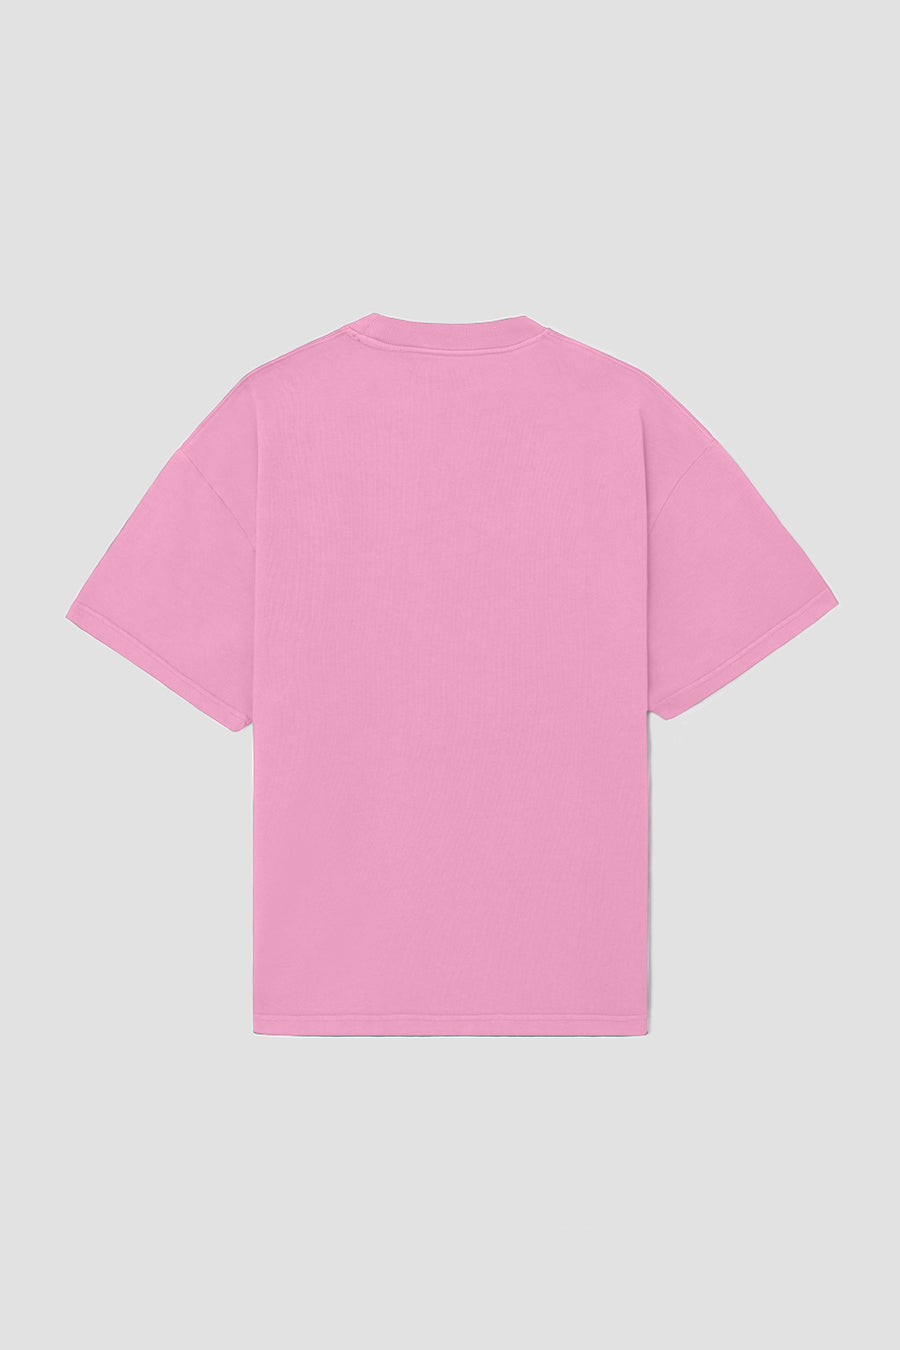 Pink T-Shirt - only available in wholesale